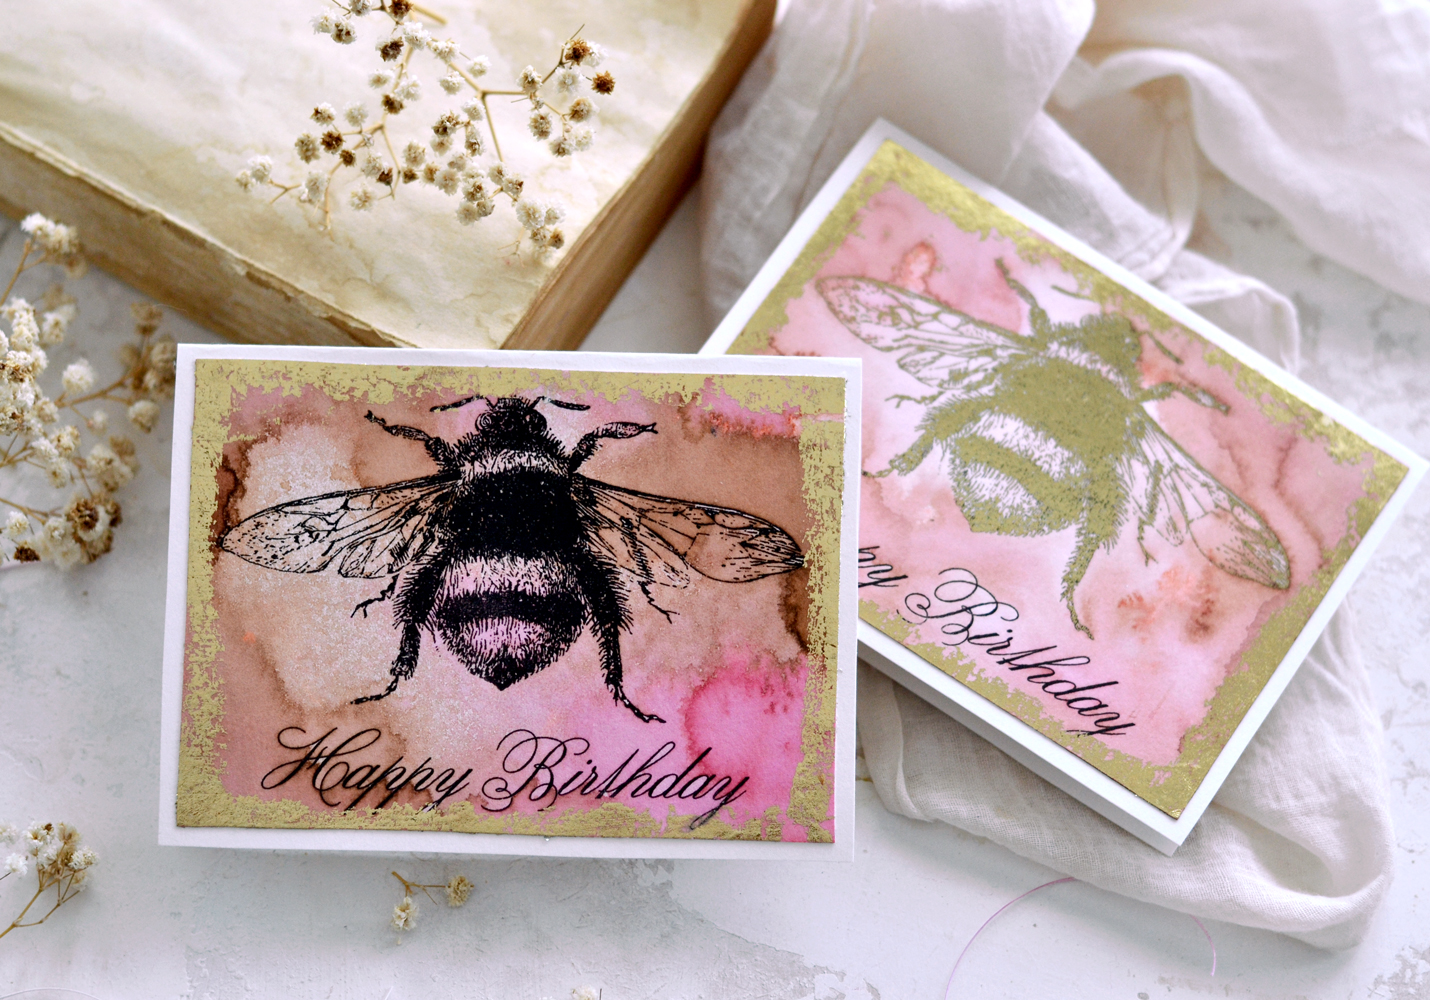 Two of the final vintage bee birthday cards